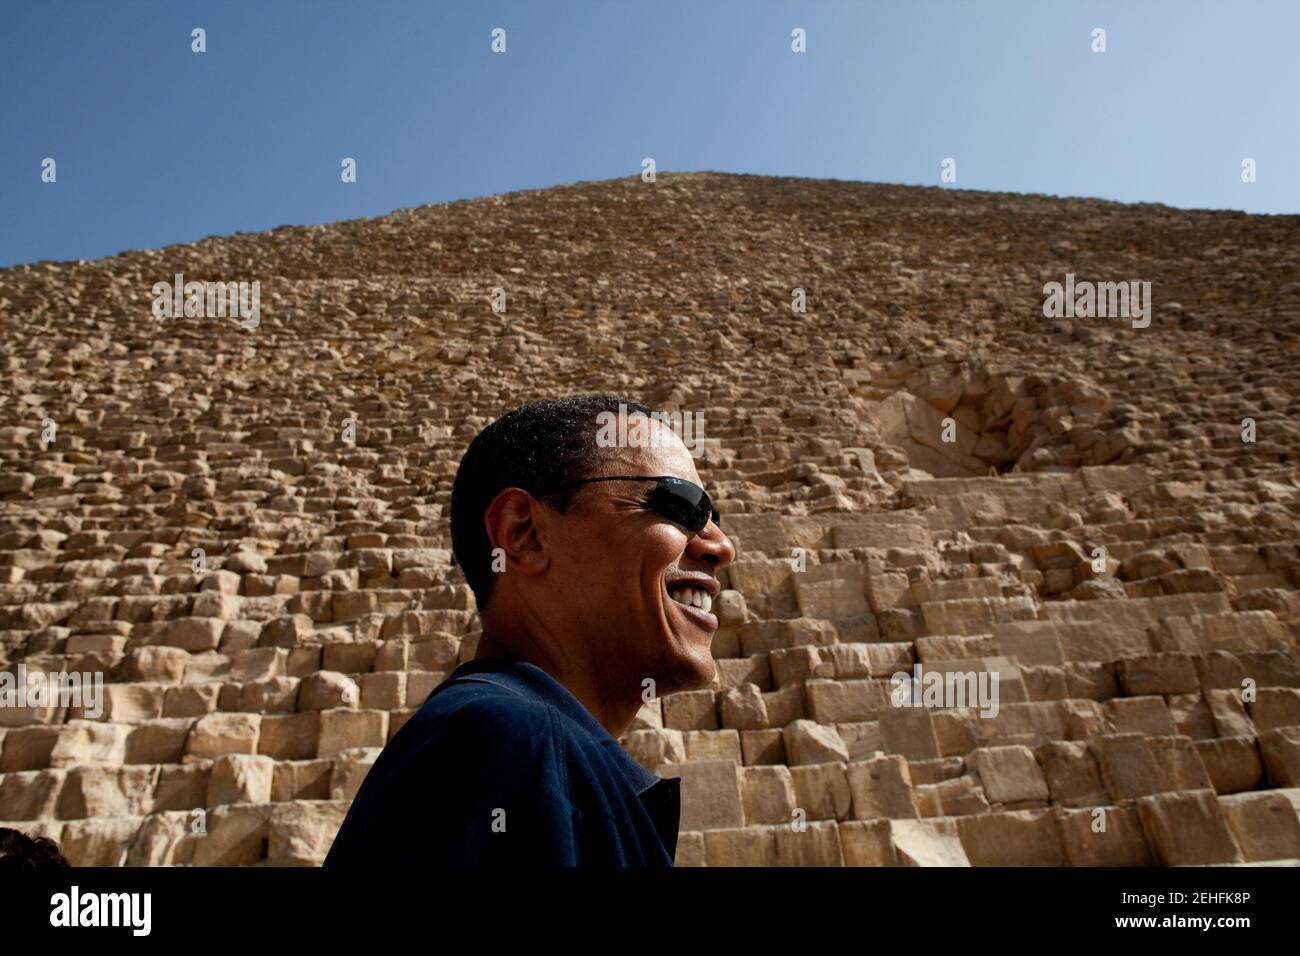 President Barack Obama tours the Pyramids of Giza in Egypt on June 4, 2009. Stock Photo